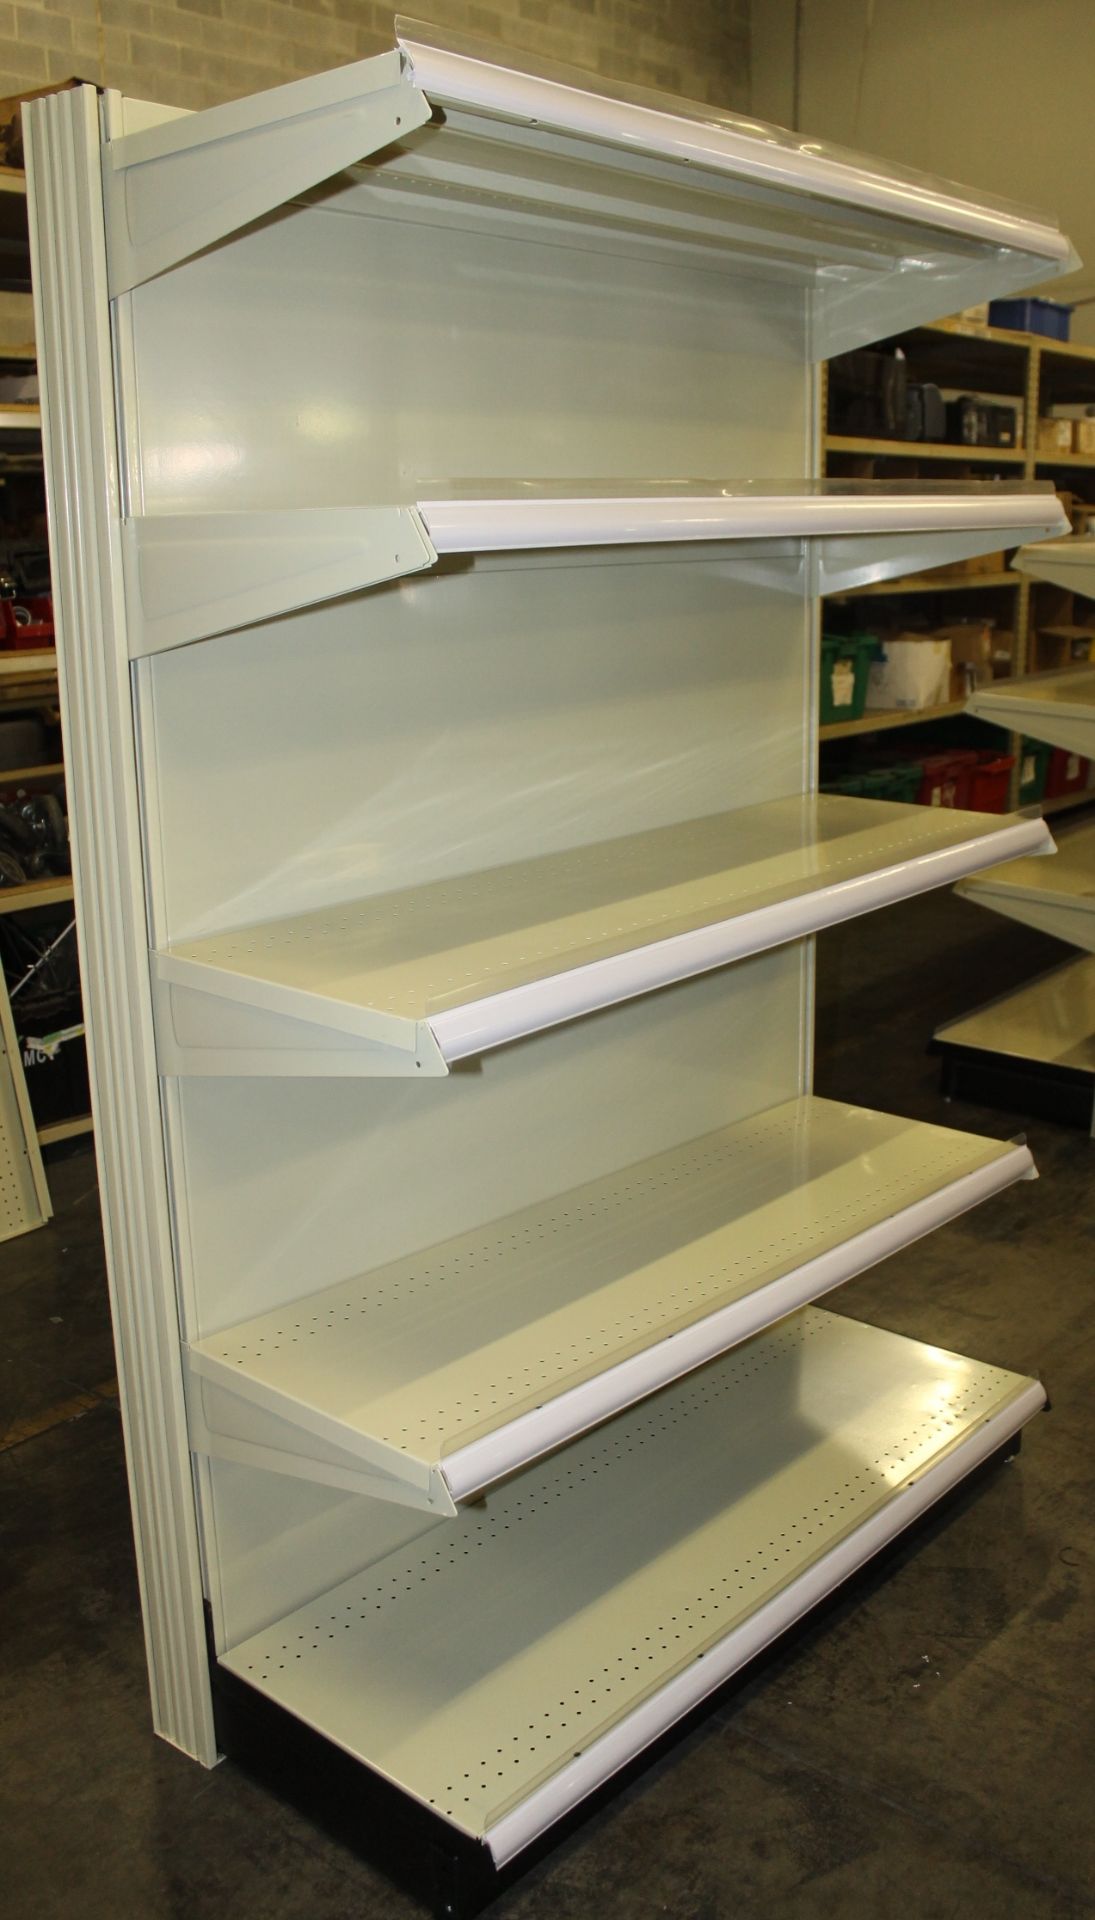 5 SECTIONS OF GONDOLA SHELVING WITH 4 SHELVES LEVEL DOUBLE SIDED - Image 2 of 3